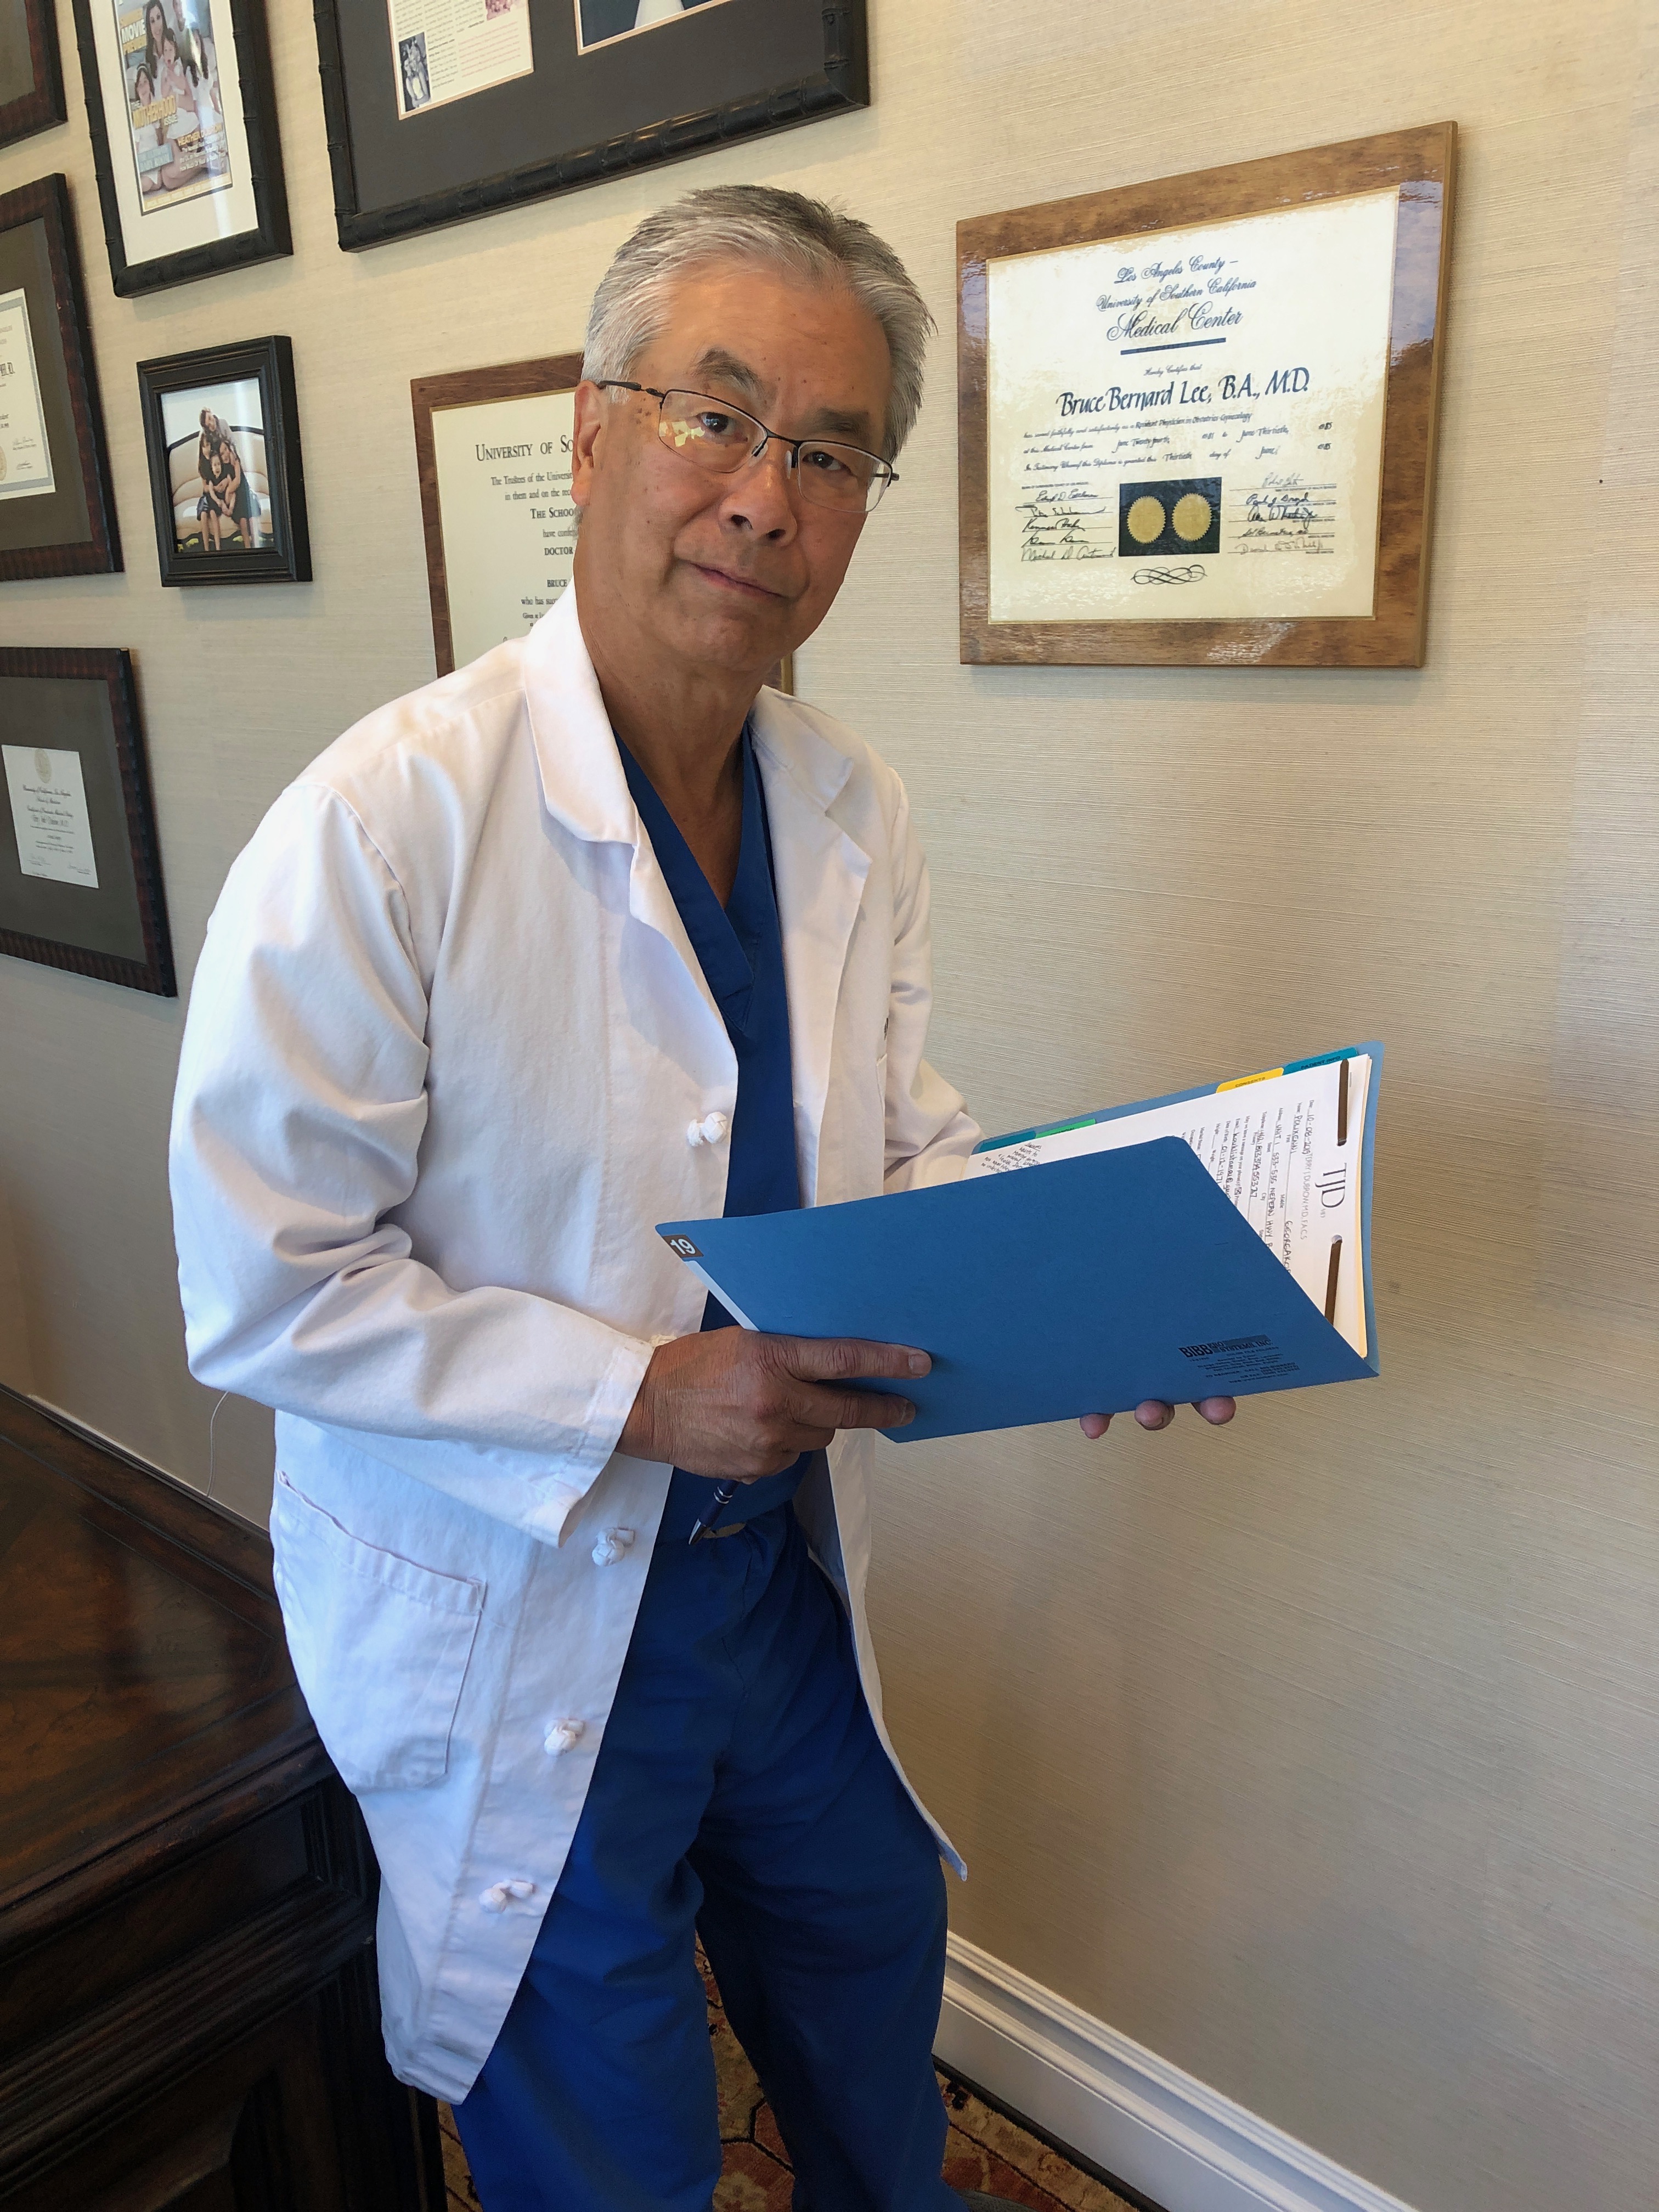 Dr. Bruce B. Lee - Newport Beach | Dr. Terry Dubrow